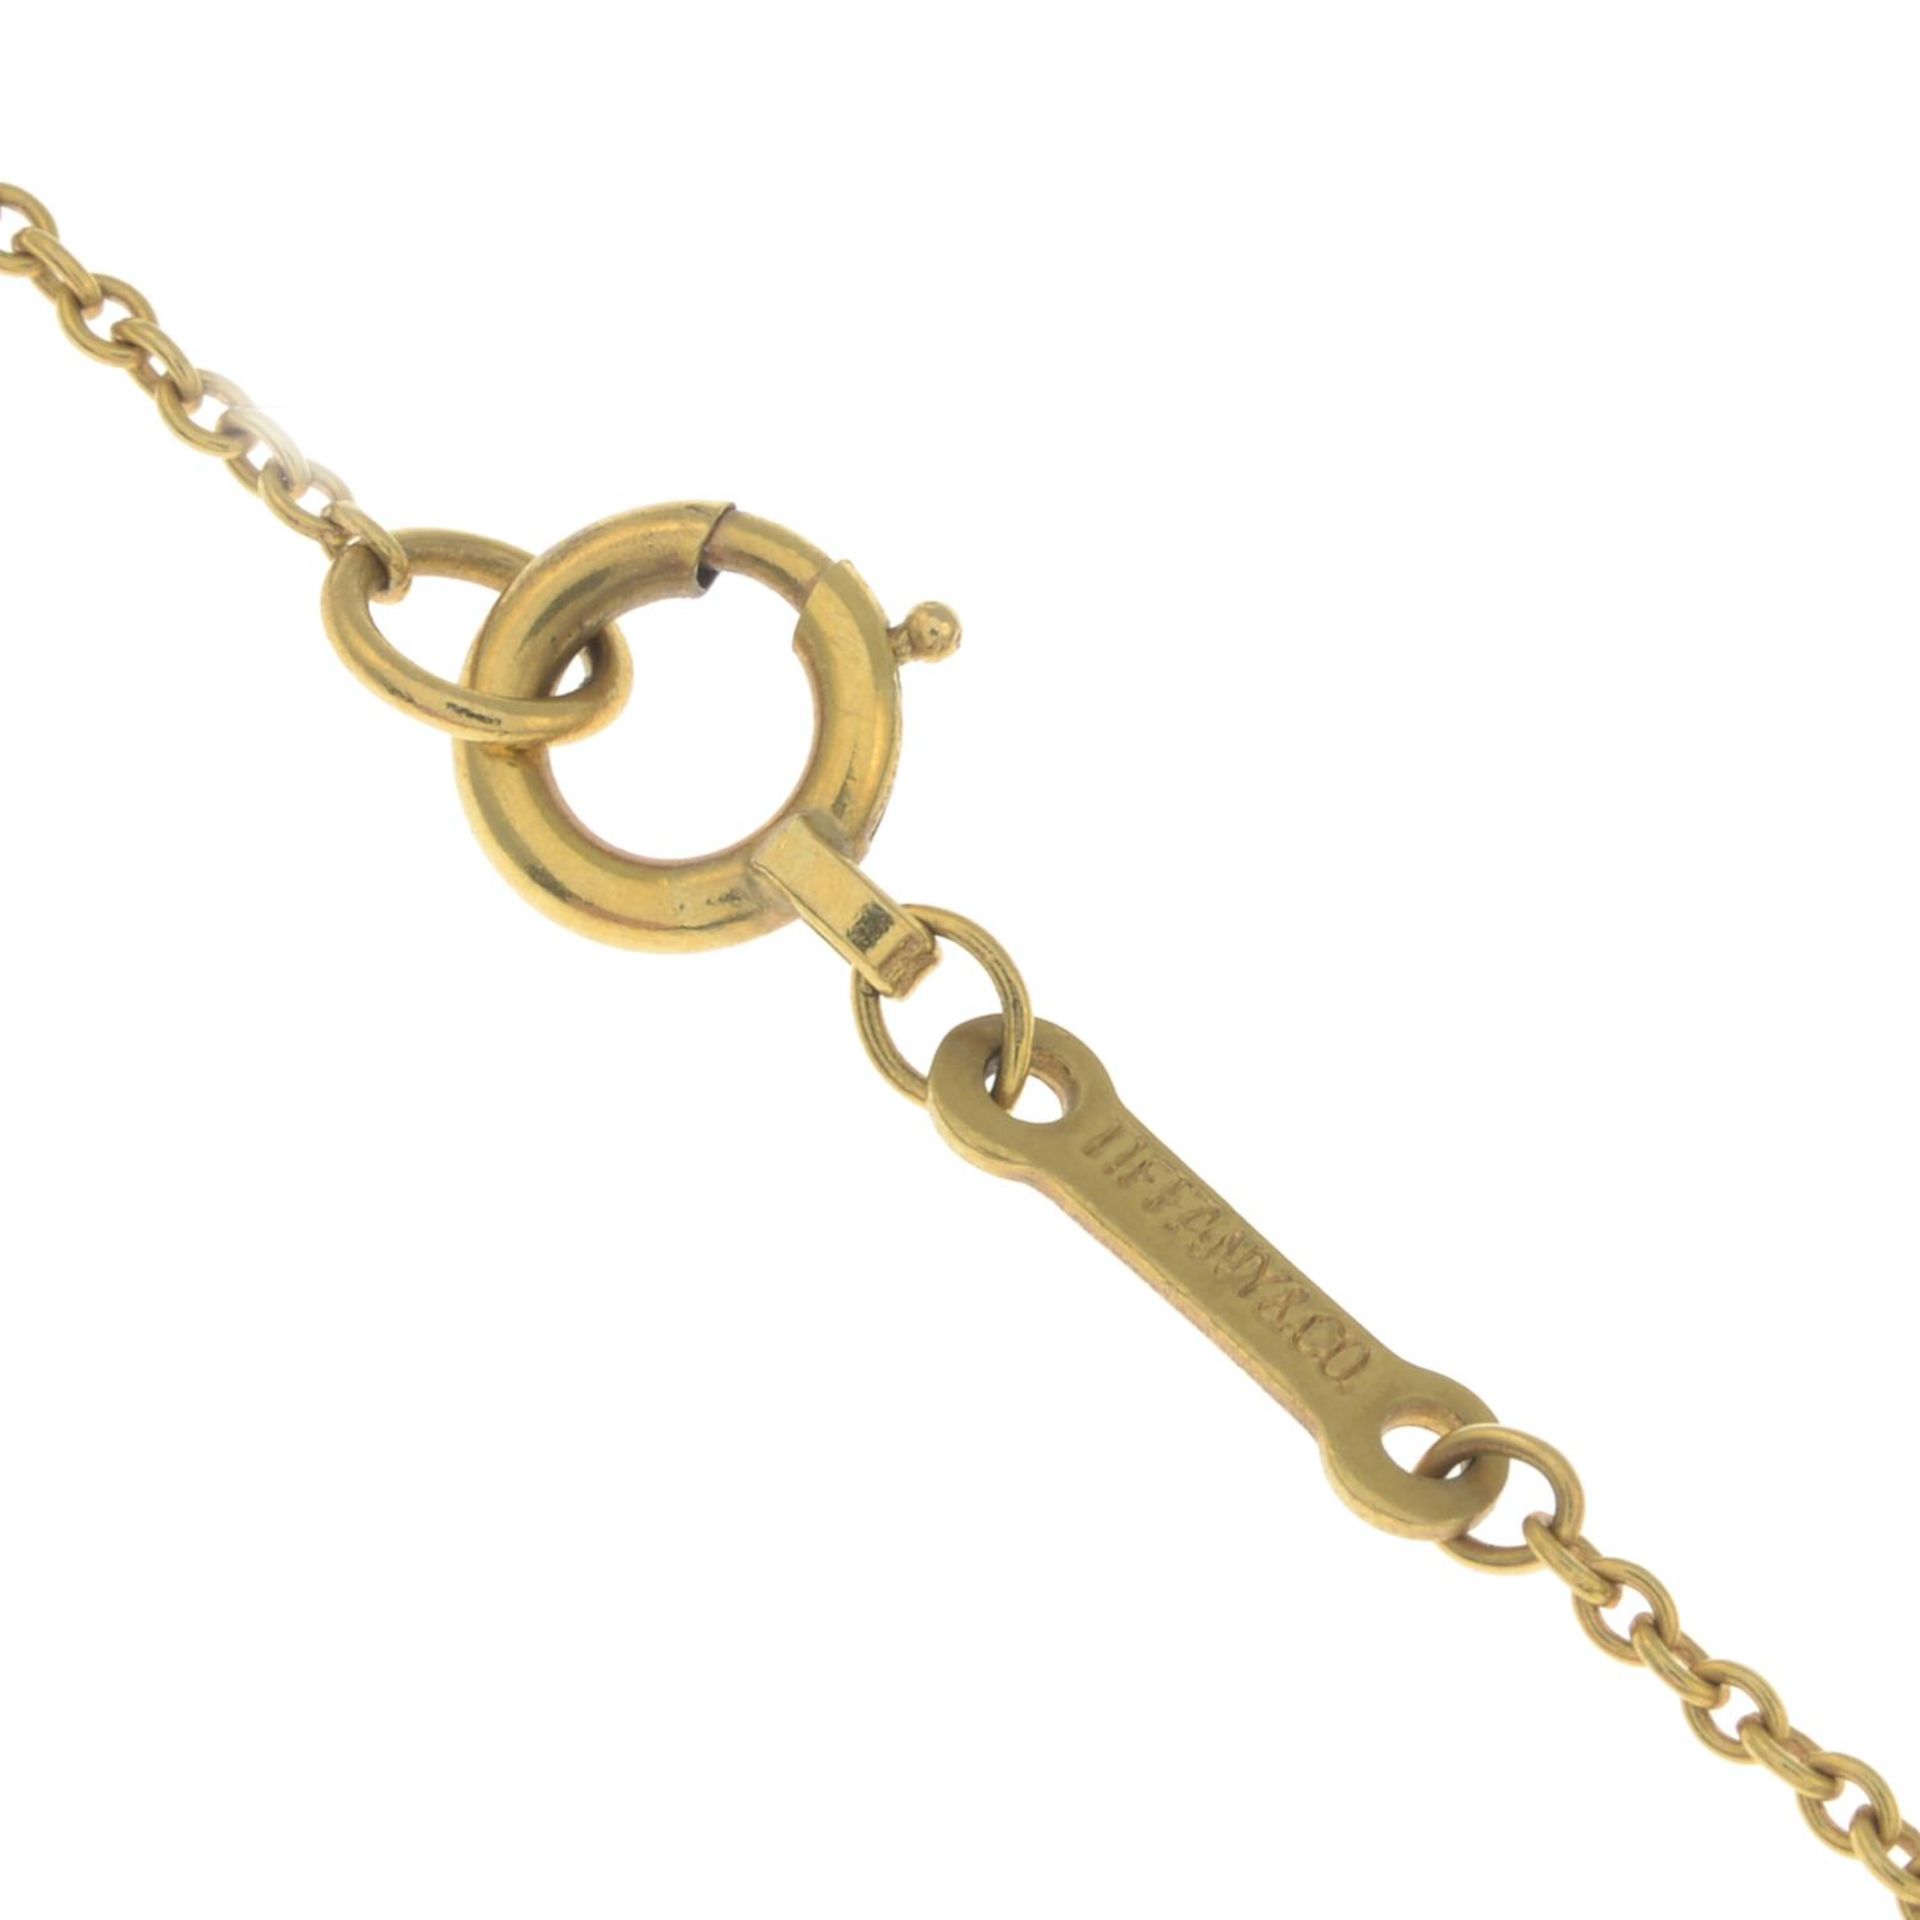 A '1980' pendant with chain, by Paloma Picasso for Tiffany & Co.Pendant signed 1980 Tiffany & Co. - Image 3 of 3